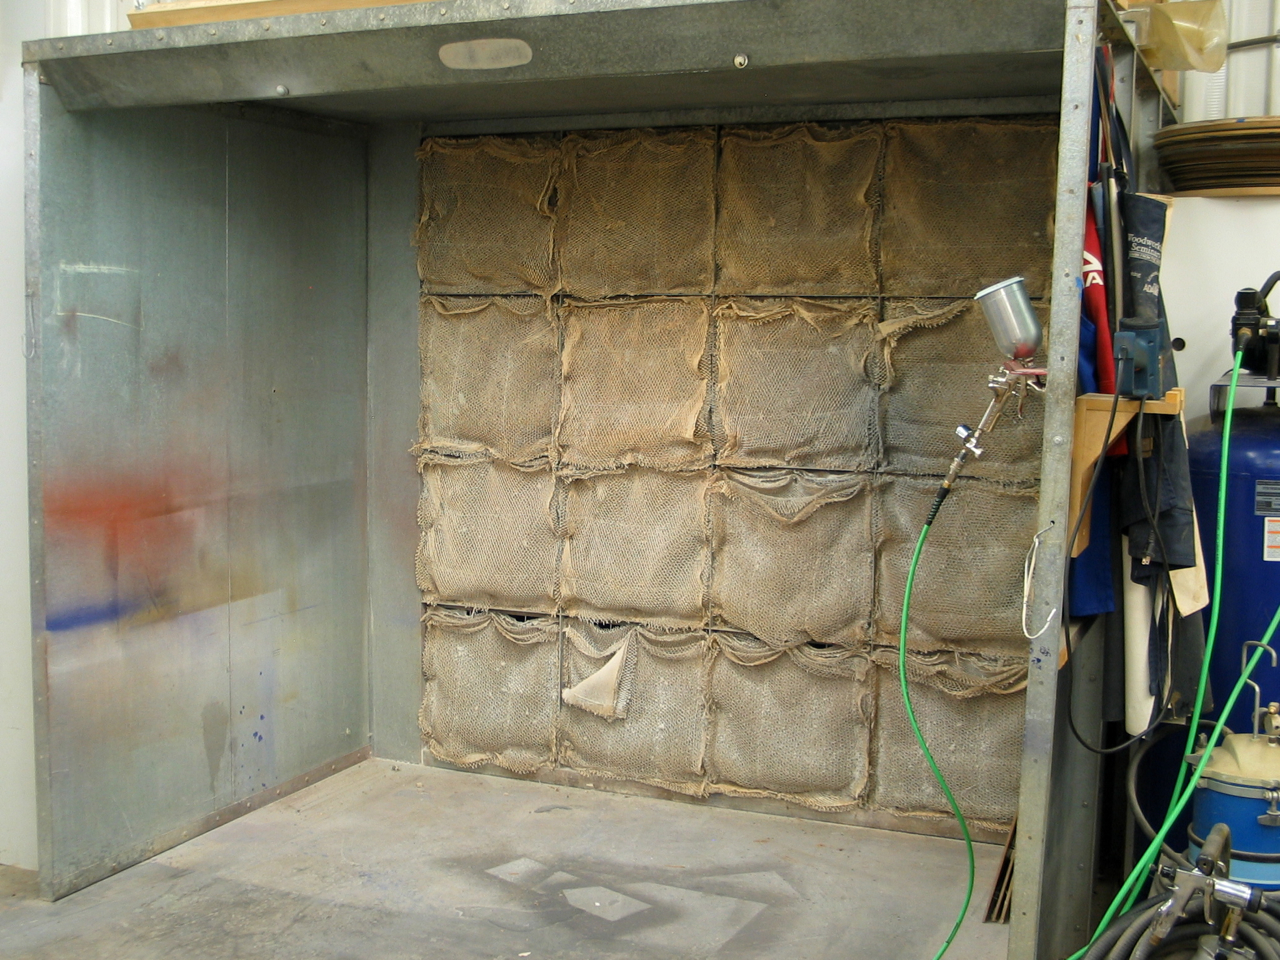 Spray Booth for a Small Shop - Popular Woodworking Magazine